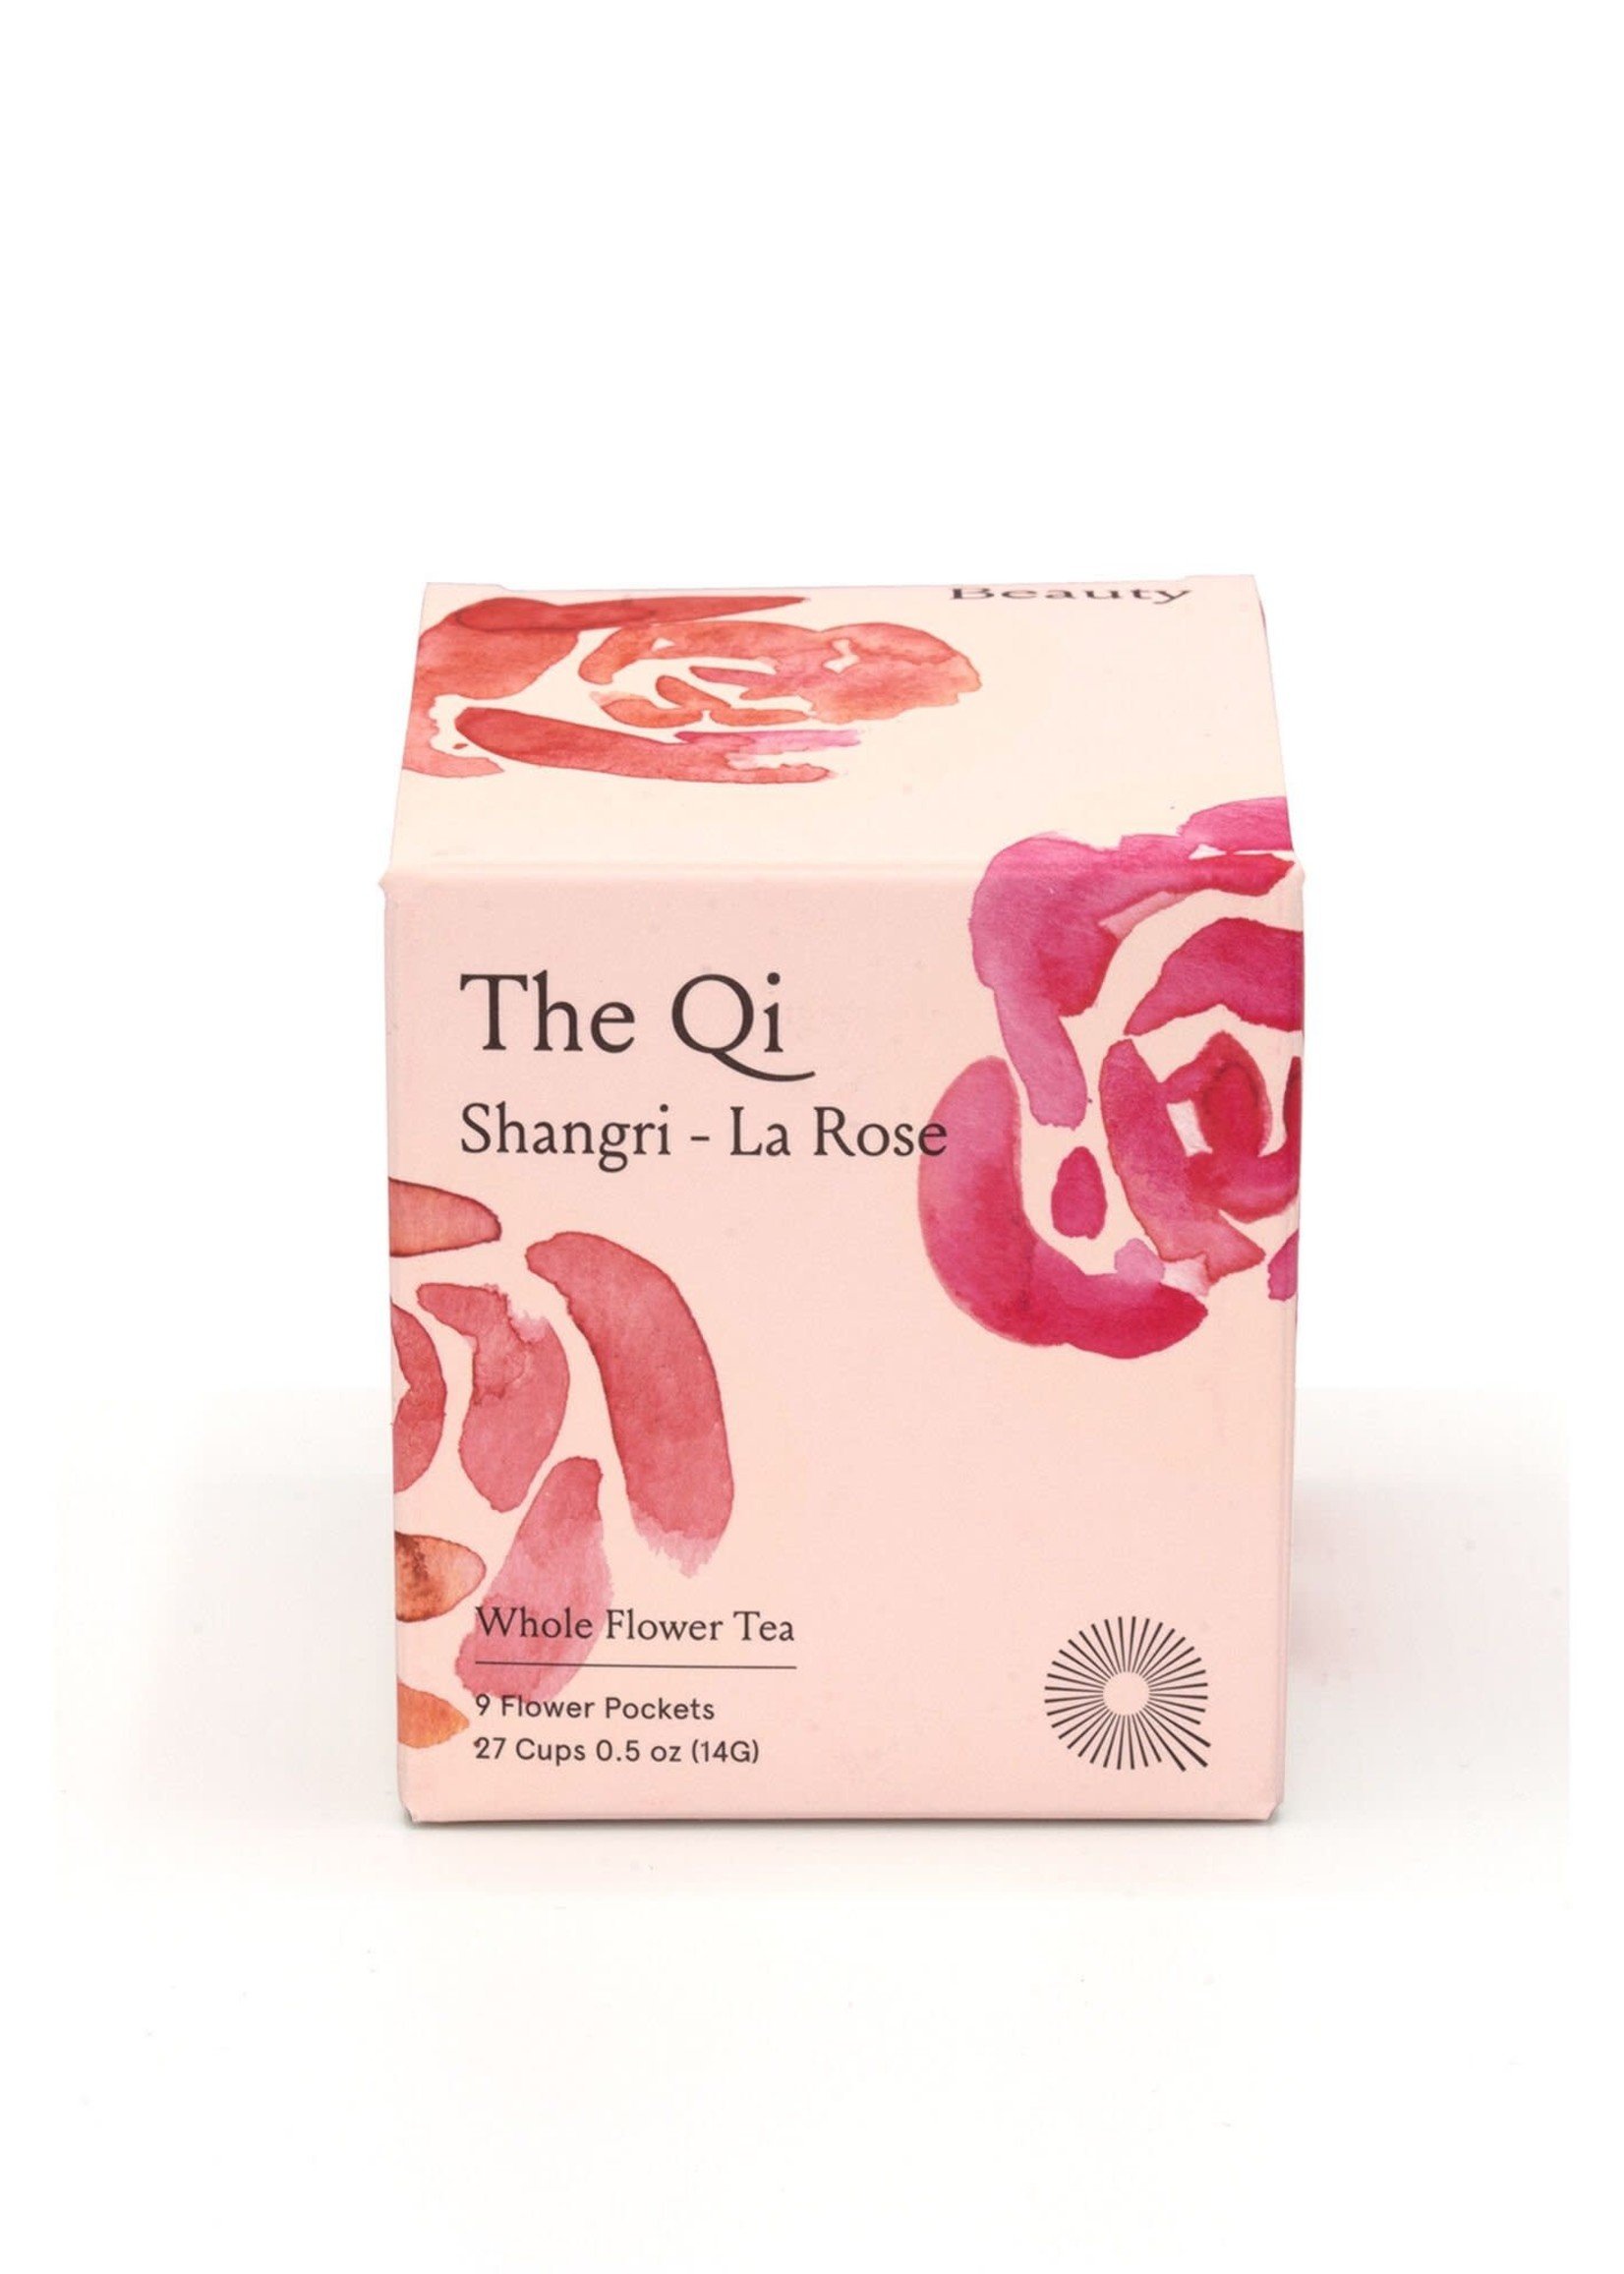 The Qi The Qi, Shanghai La Rose, whole flower infusion